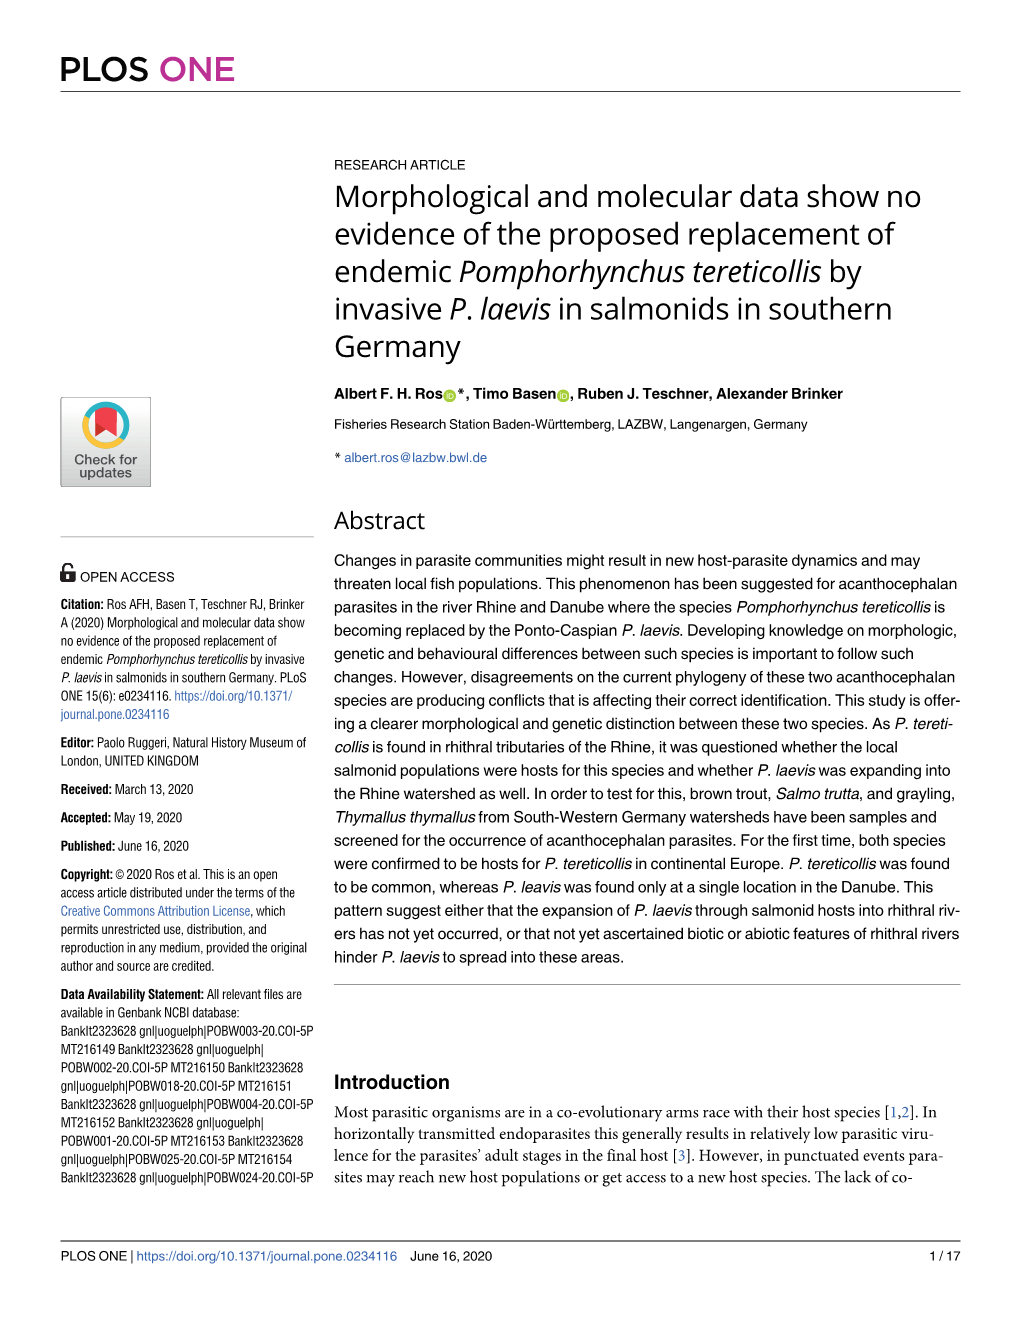 Morphological and Molecular Data Show No Evidence of the Proposed Replacement of Endemic Pomphorhynchus Tereticollis by Invasive P